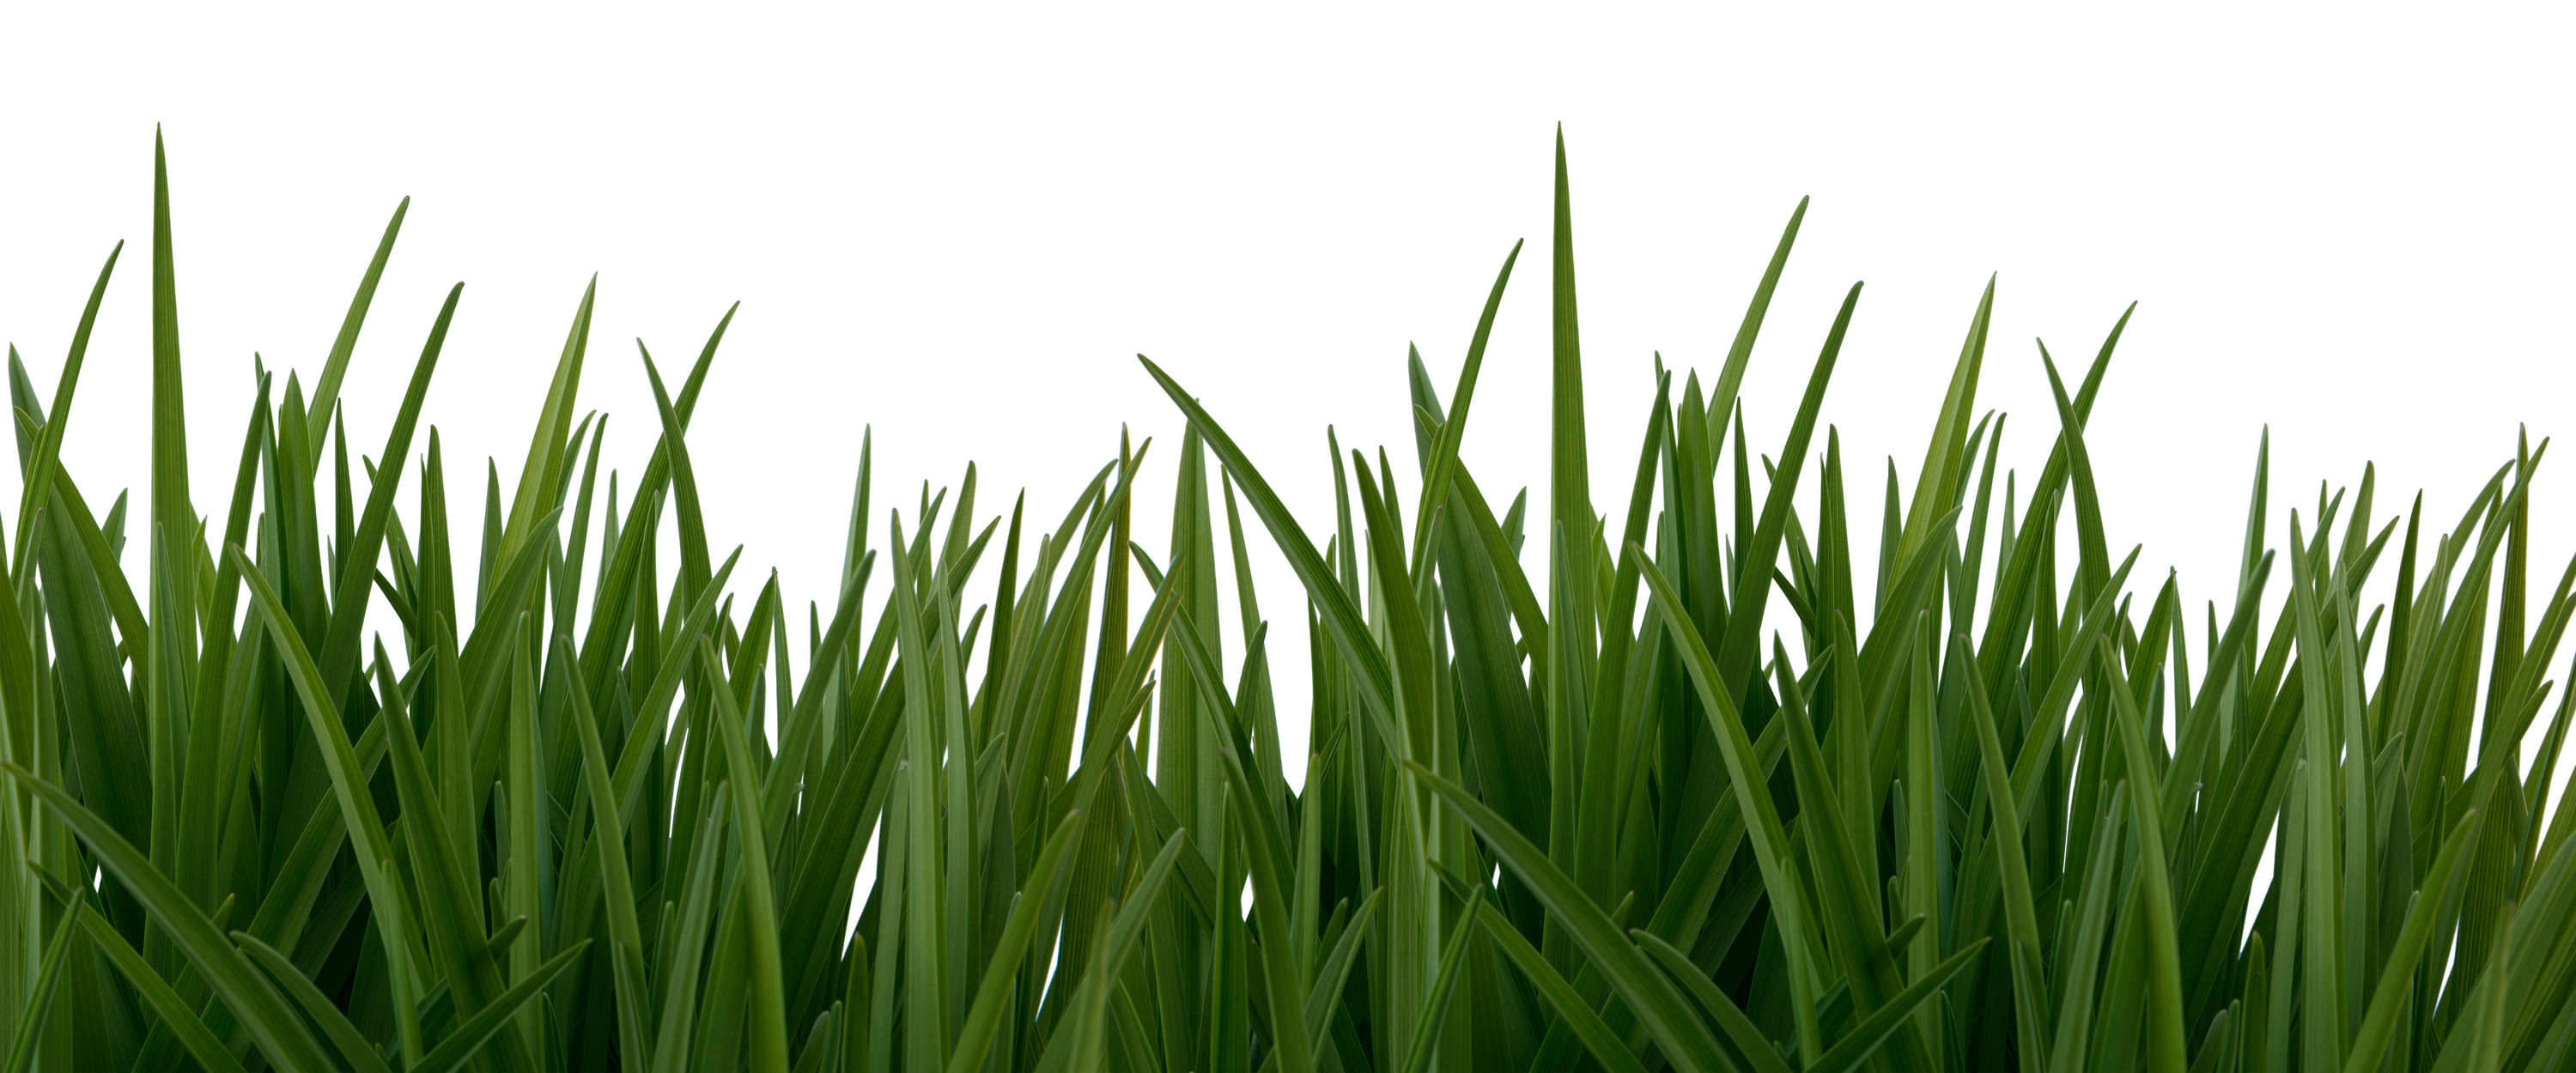             Nature mural blades of grass & white background
        